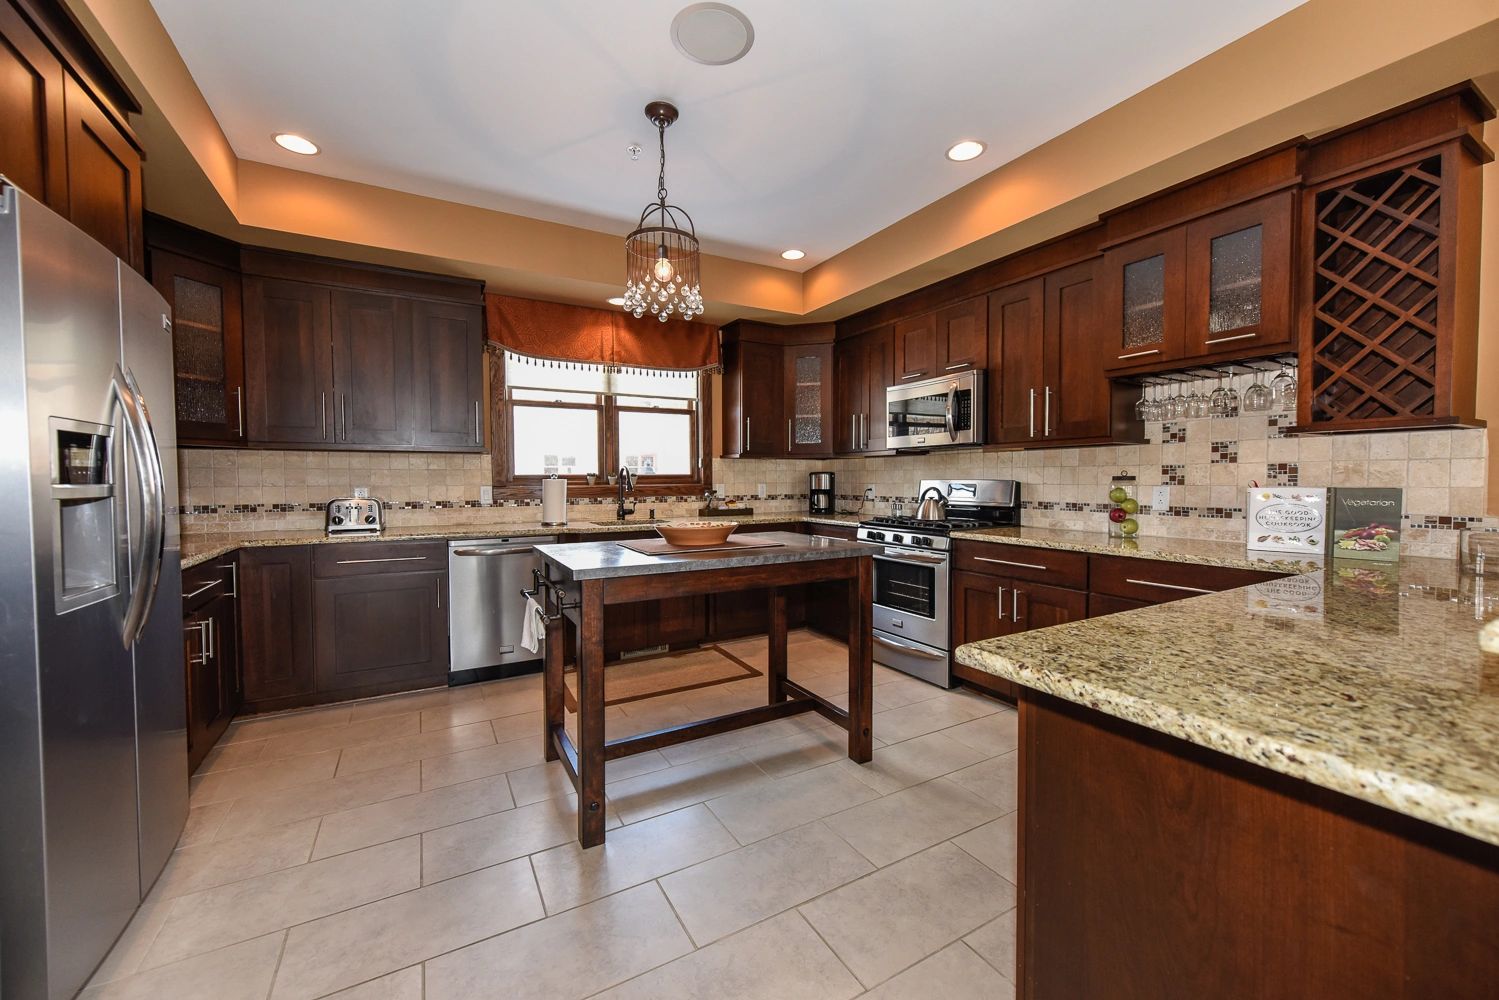 Kitchen with granite counter tops and stainless steel appliances.
